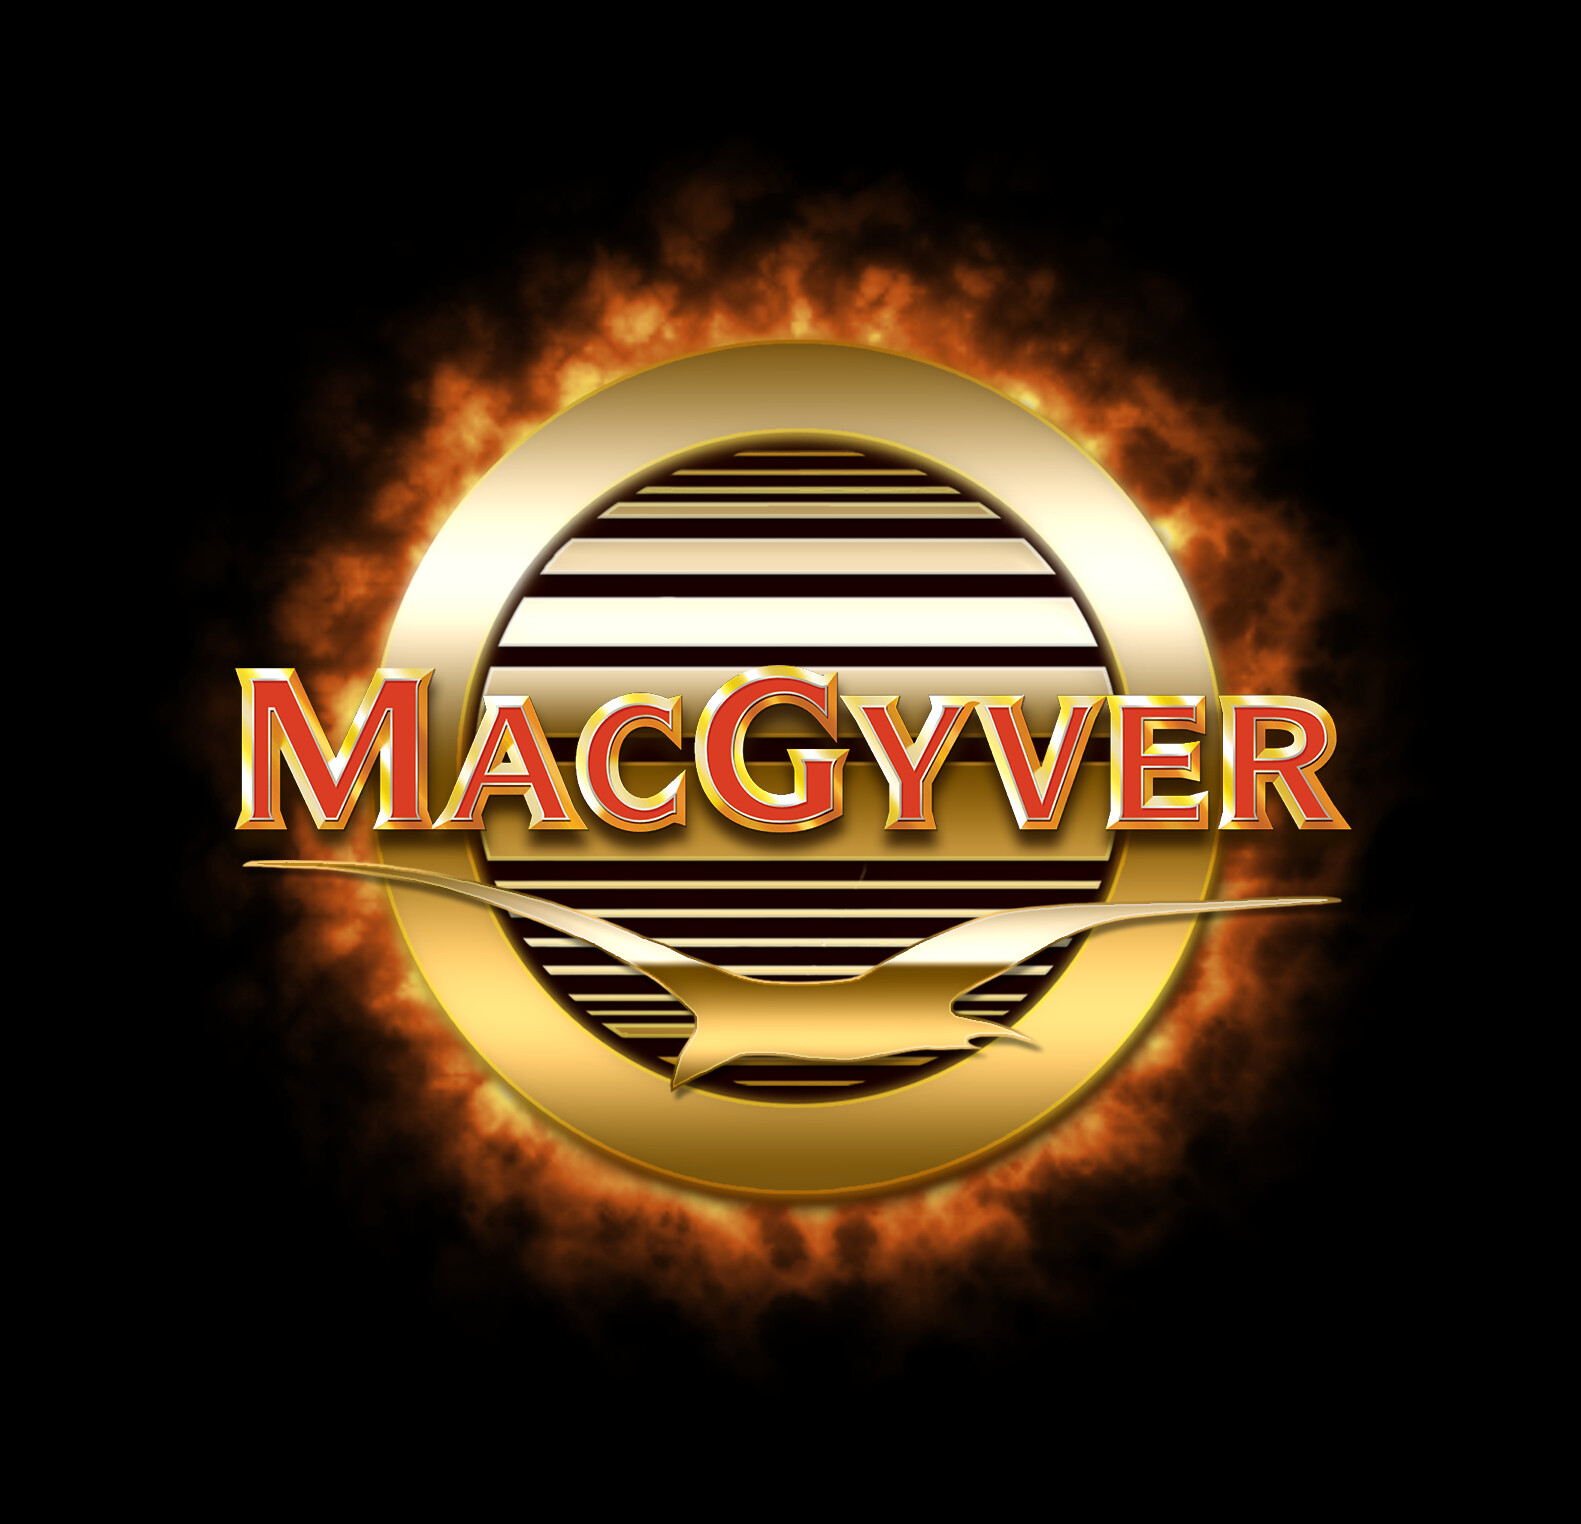 MacGyver Licensed Slot Game - Animation